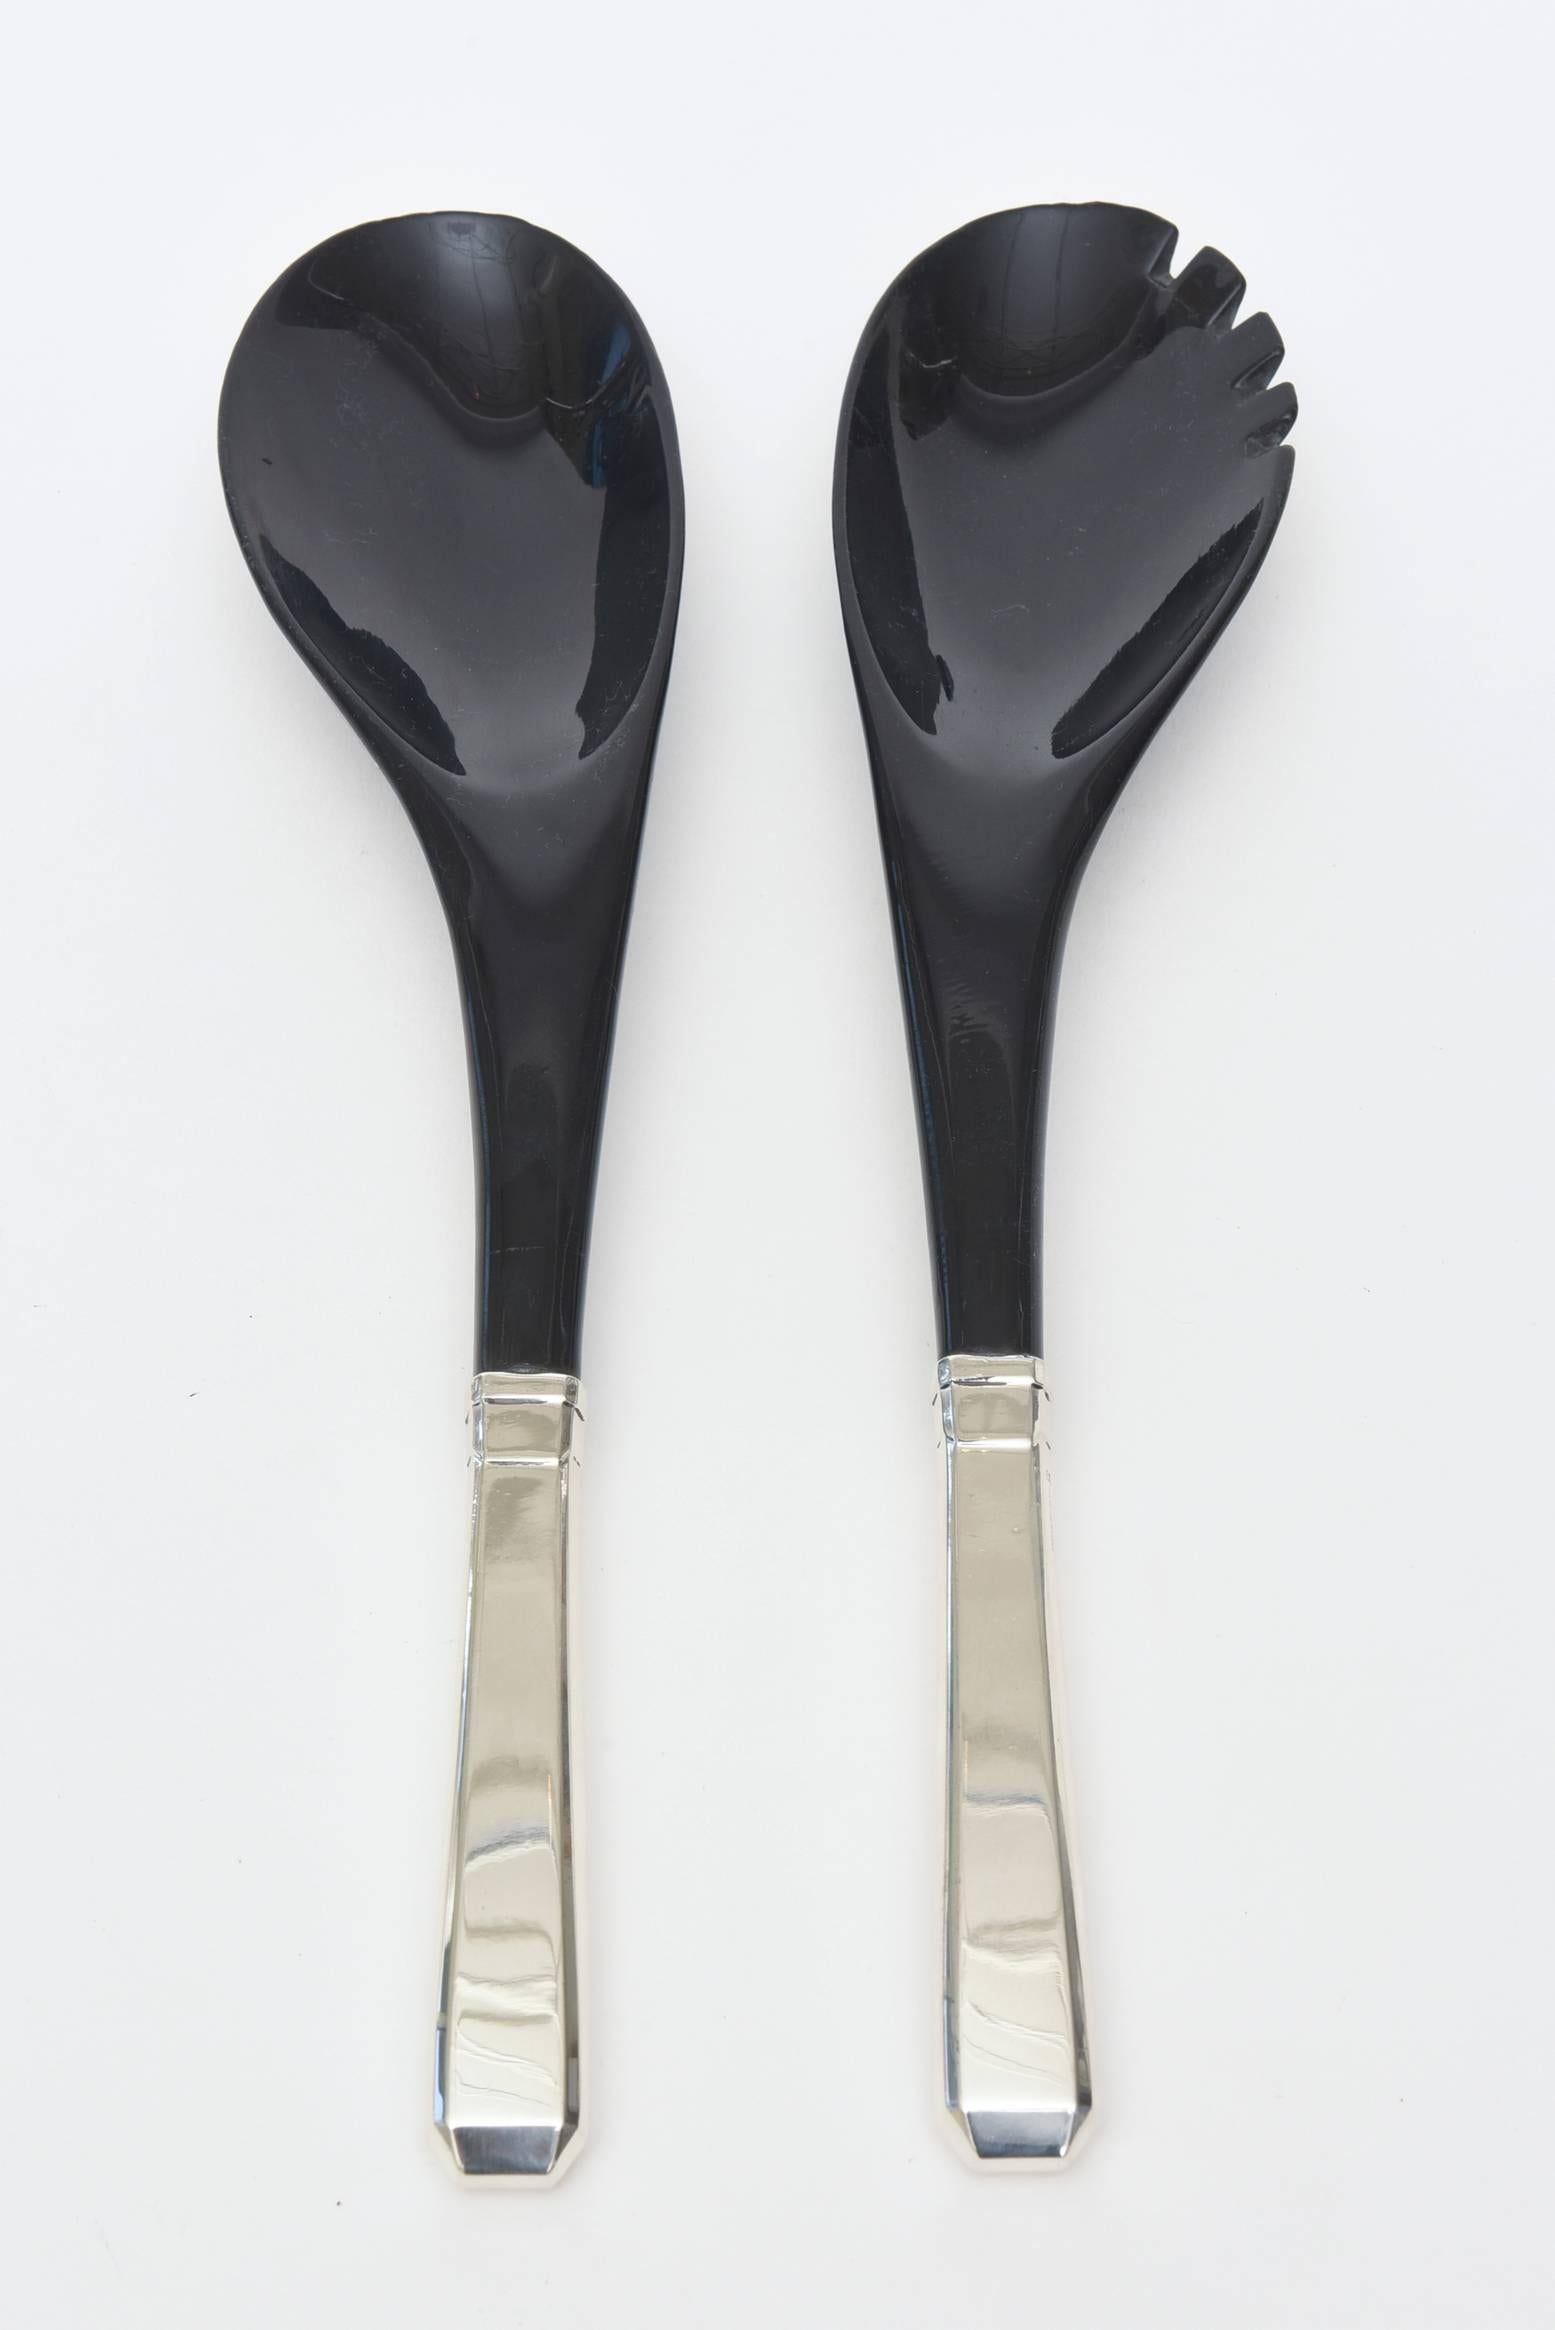 The black horn against the sterling silver hallmarked handles make a great contrast for these beautiful salad servers and or serving pieces.
Their use is unlimited for serving!

